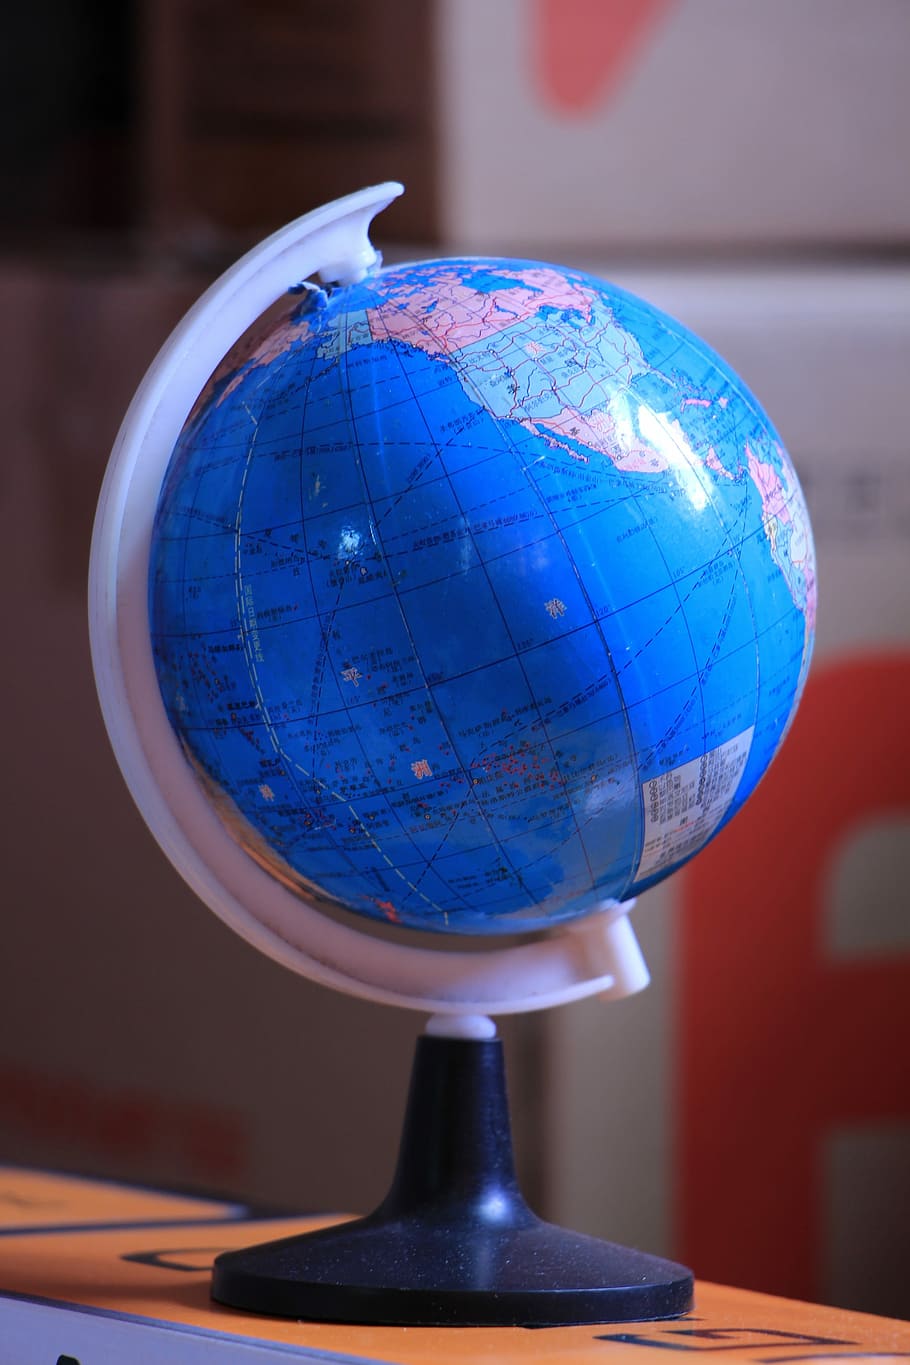 Globe, Geography, Earth, globe - man made object, planet earth, planet - space, studio shot, futuristic, corporate business, sphere